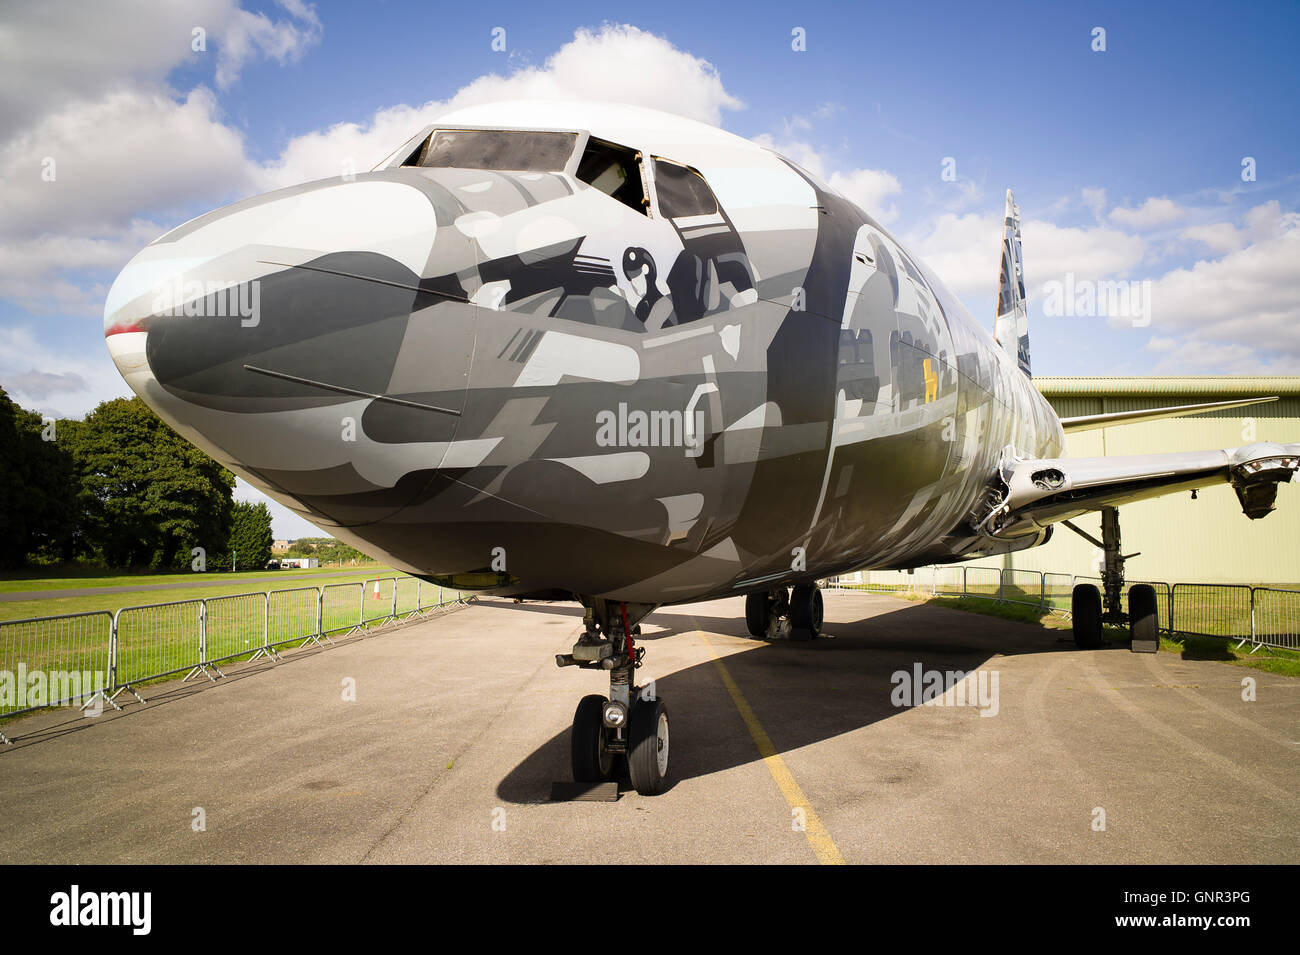 A retired civil airliner painted by art students as a project prior to dismantling Stock Photo